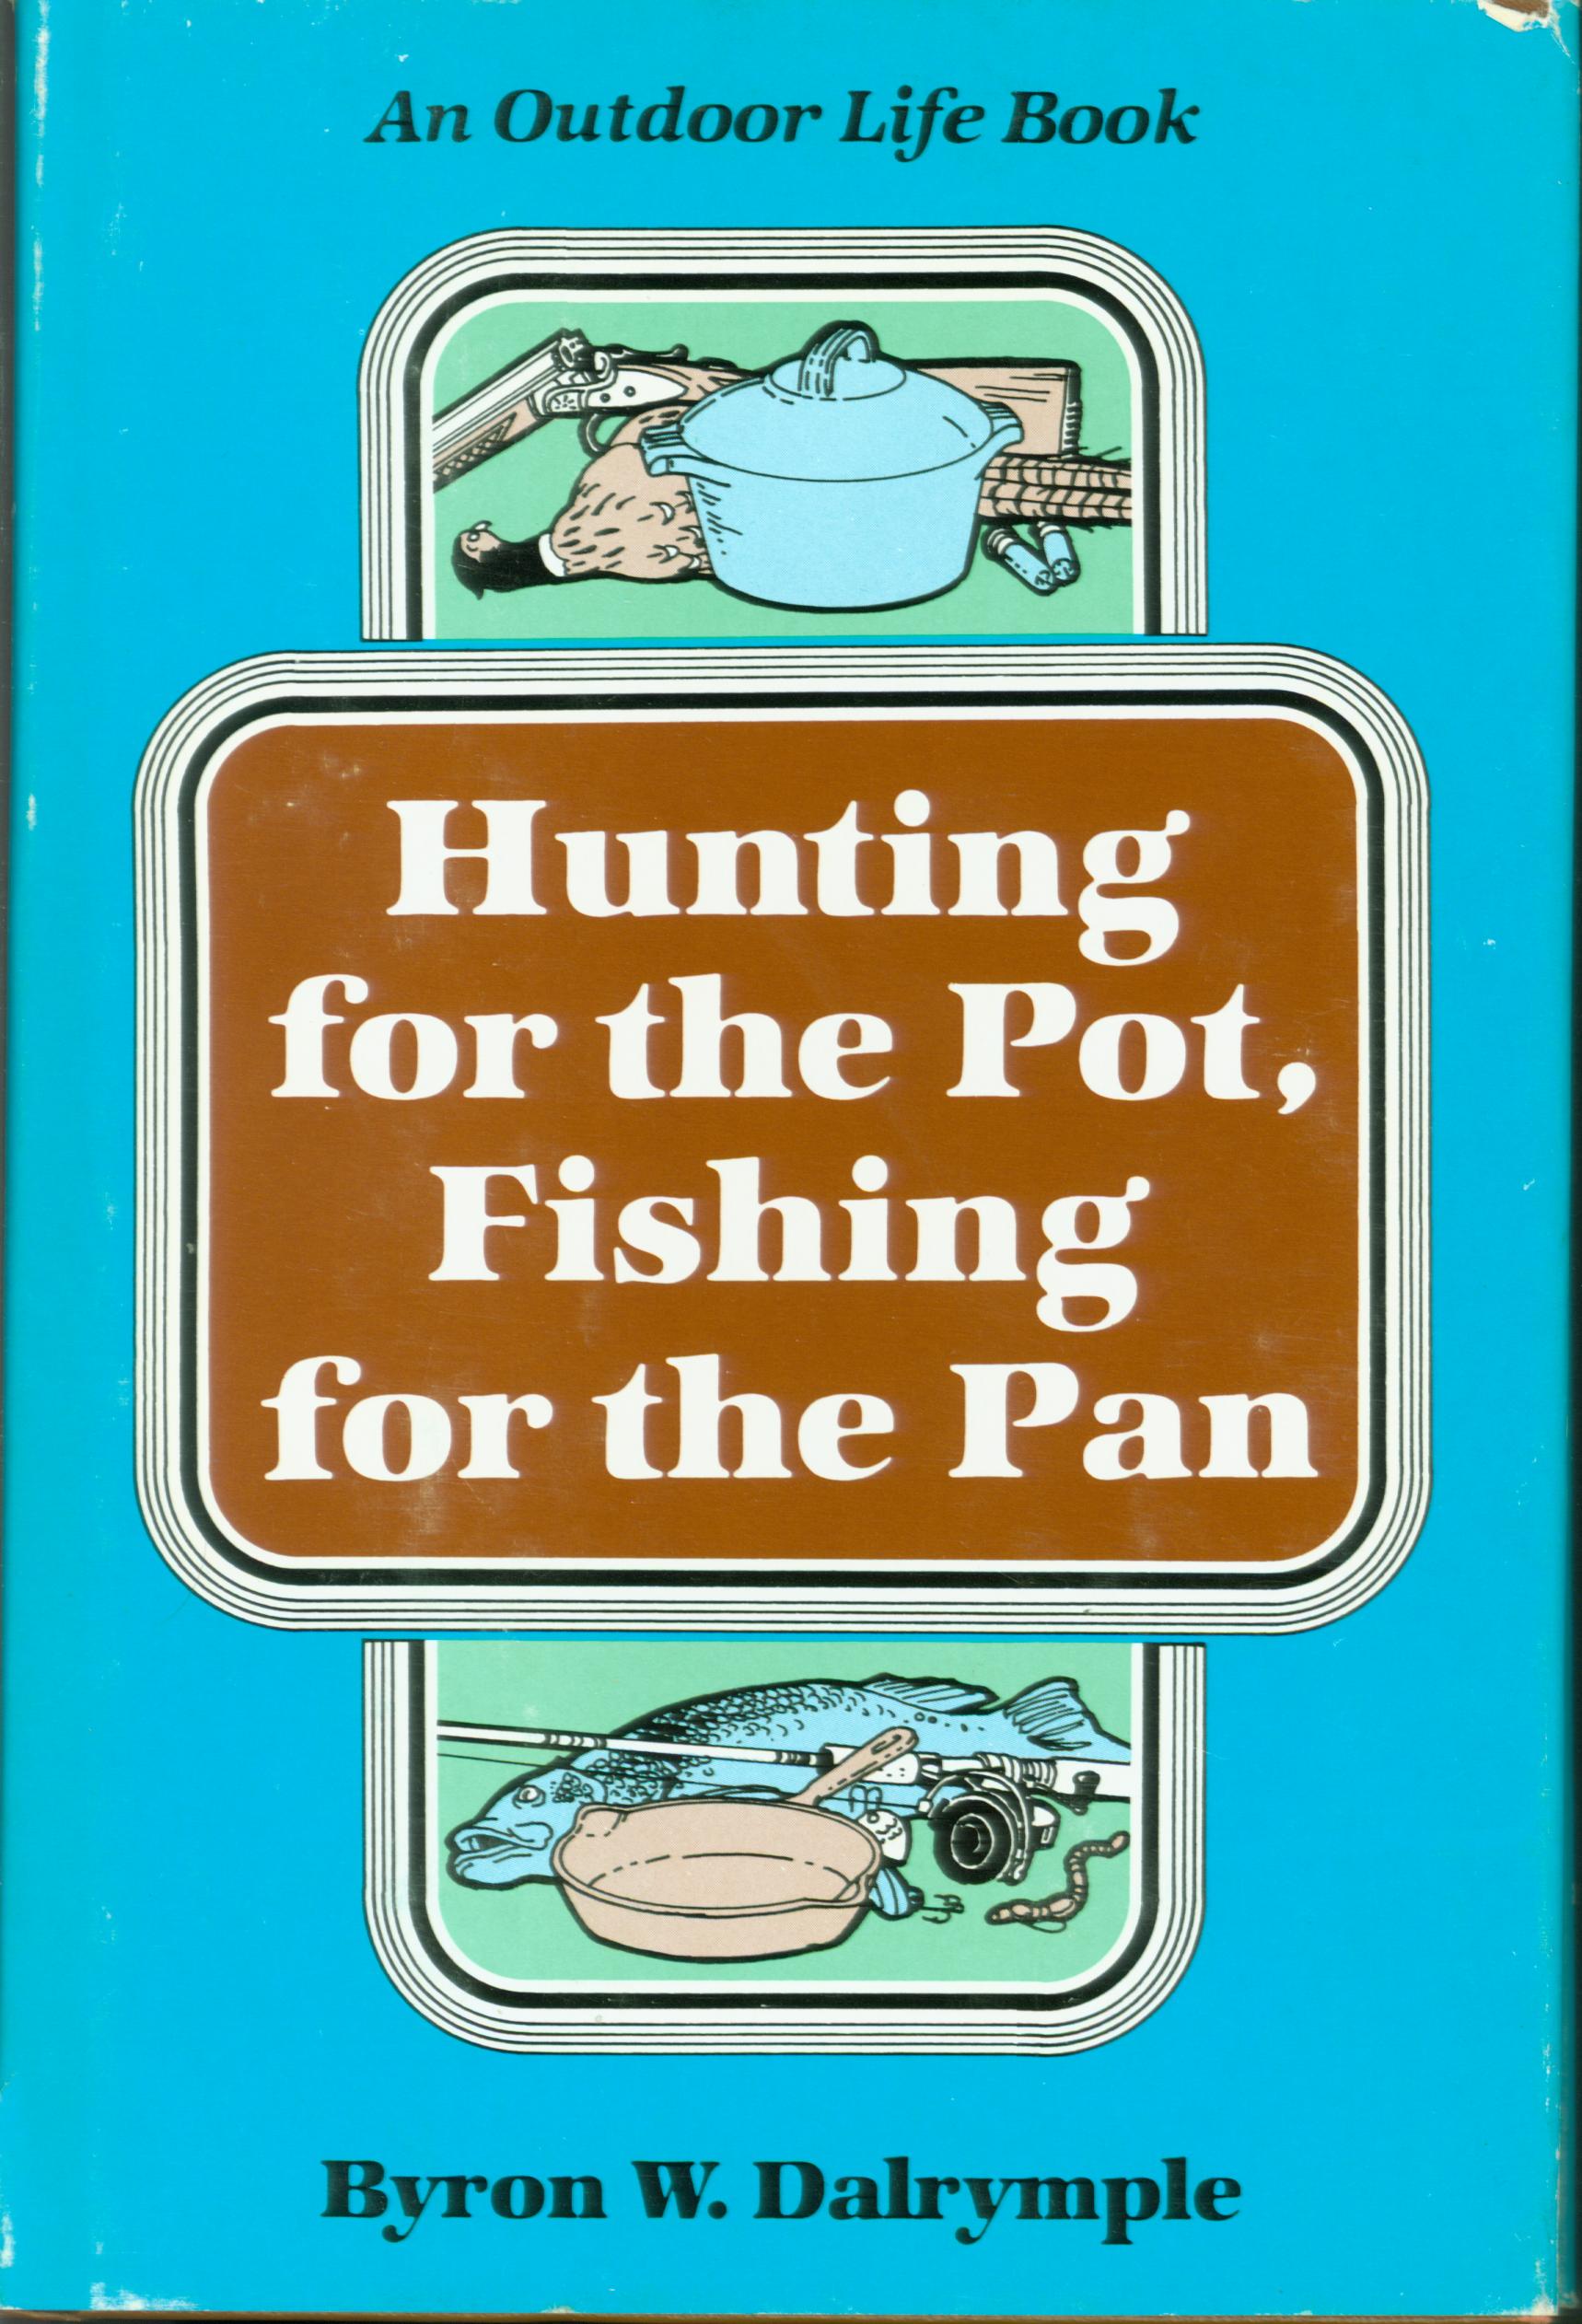 HUNTING FOR THE POT, FISHING FOR THE PAN.